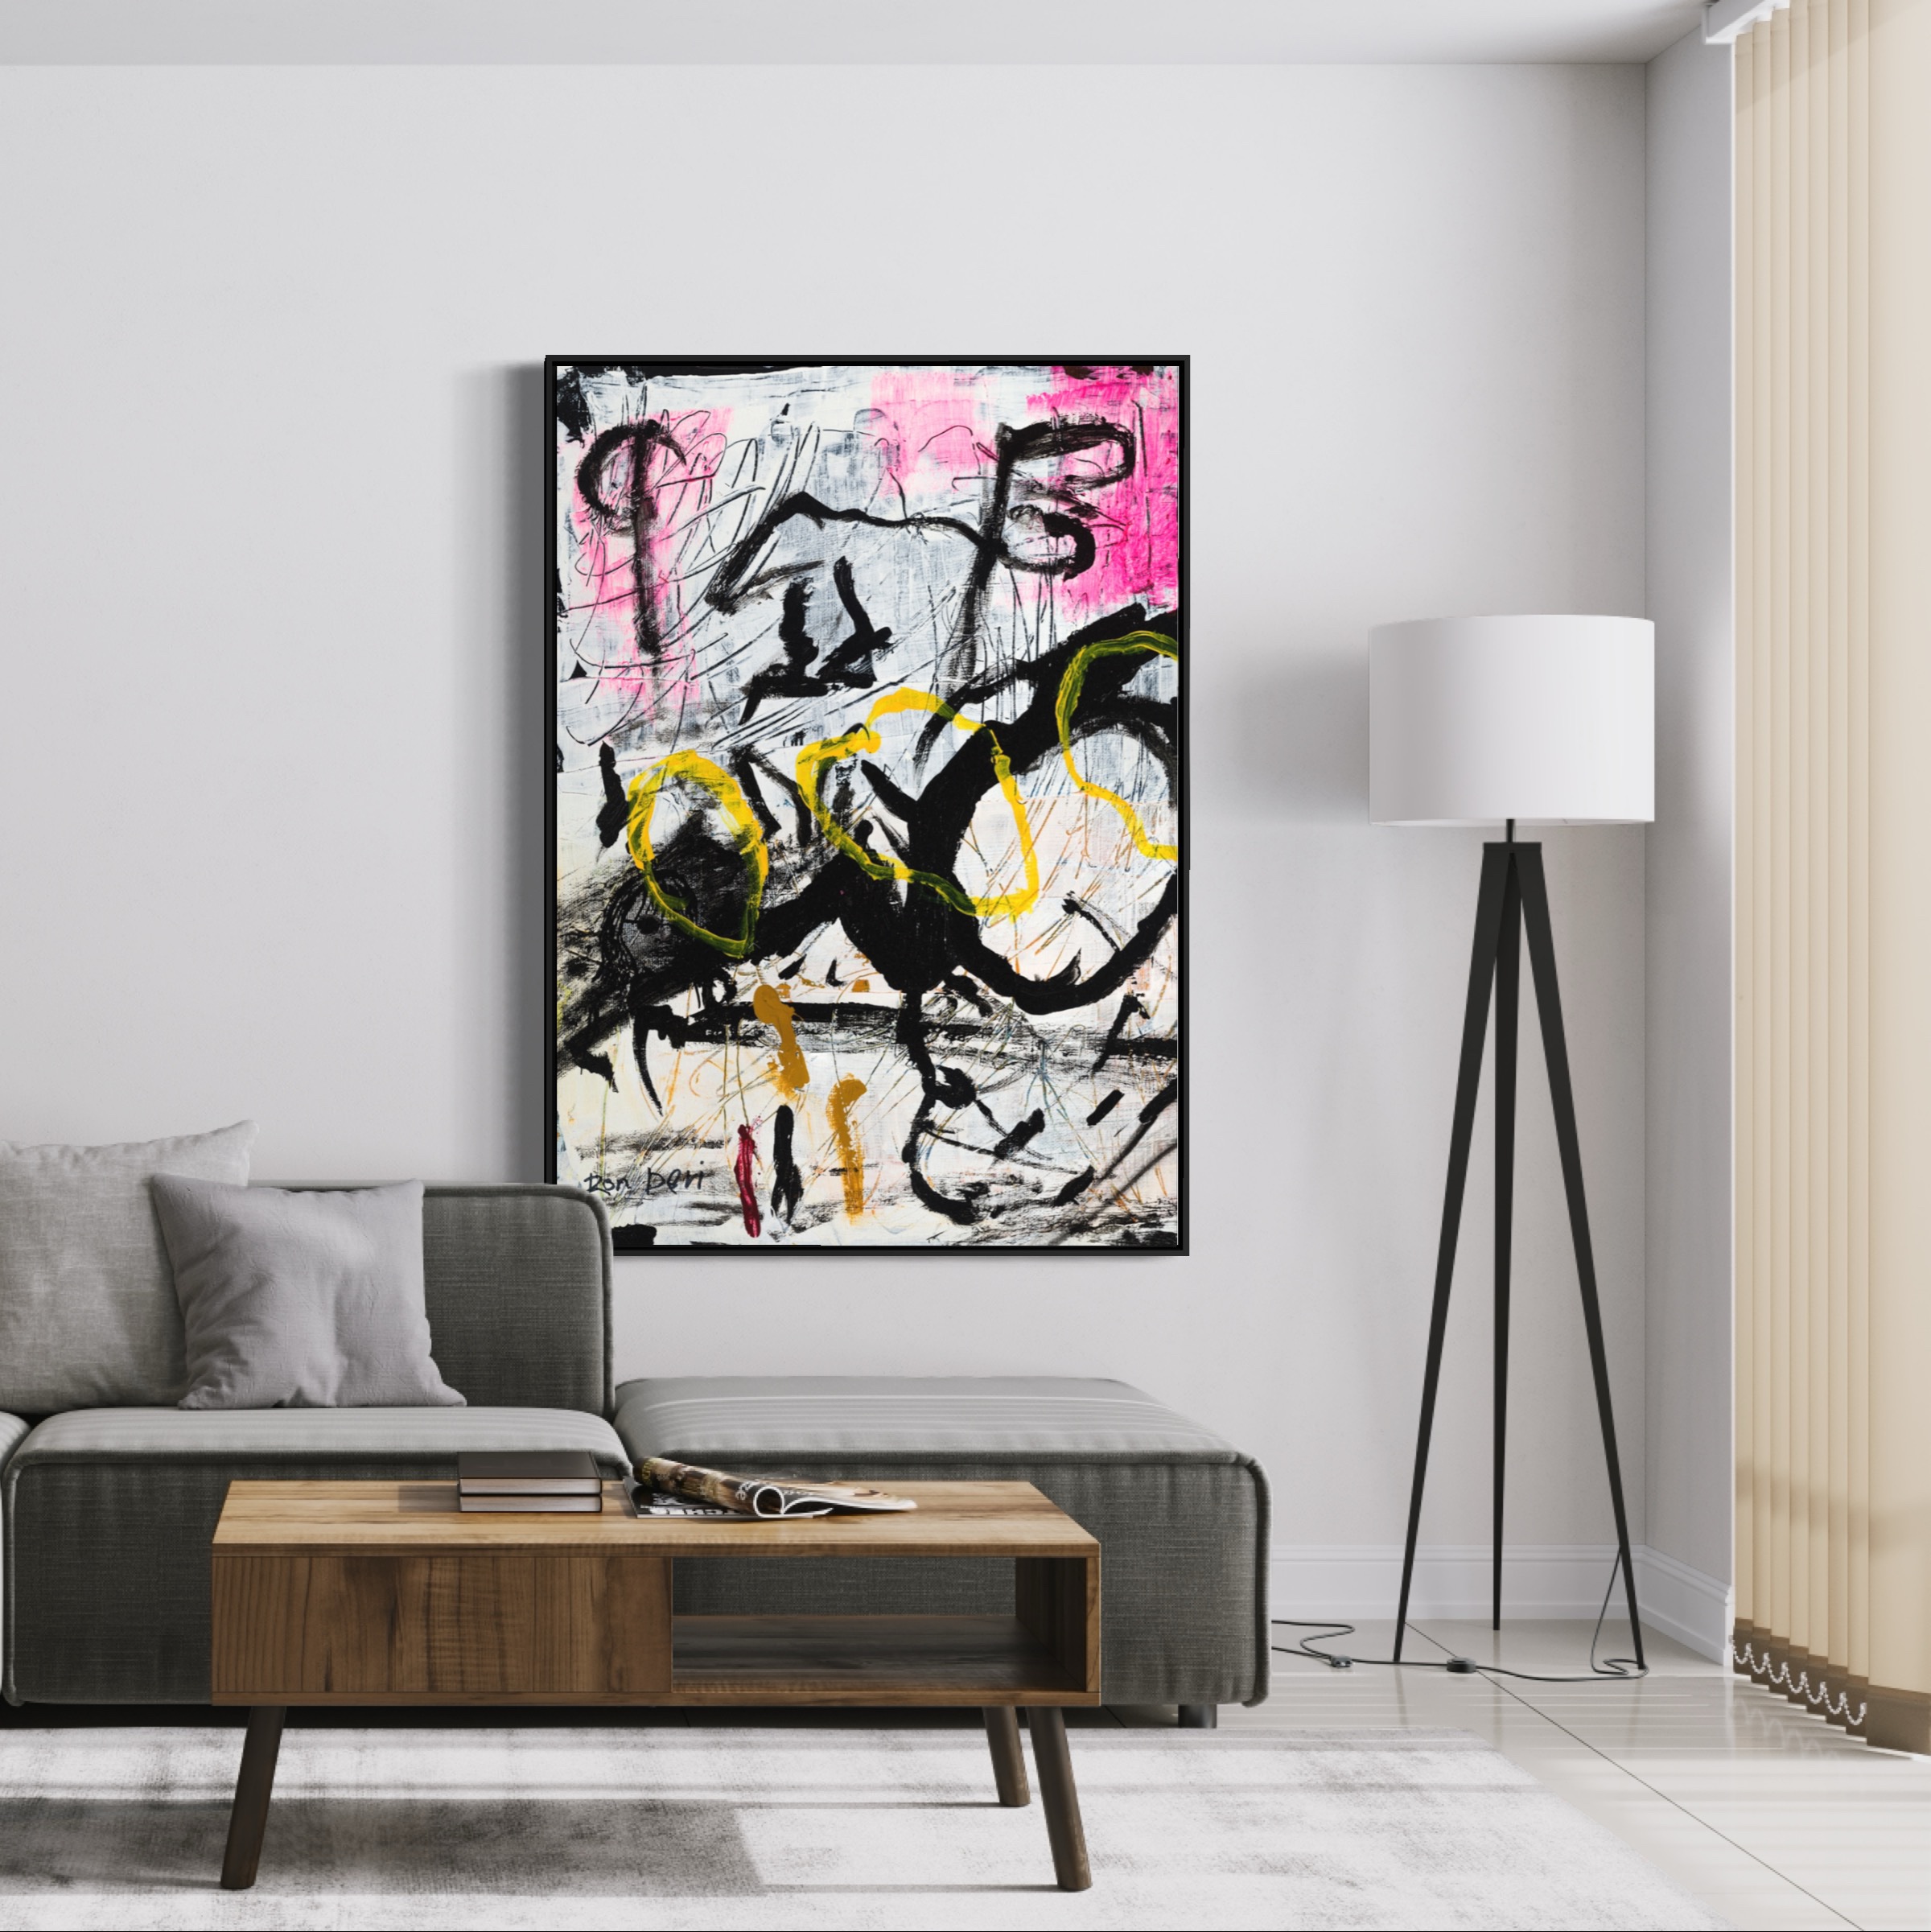 Abstract Painting Abstract Art Bright Artwork Original Artwork Fine Art You Make Me Happy no.2 Colorful Art